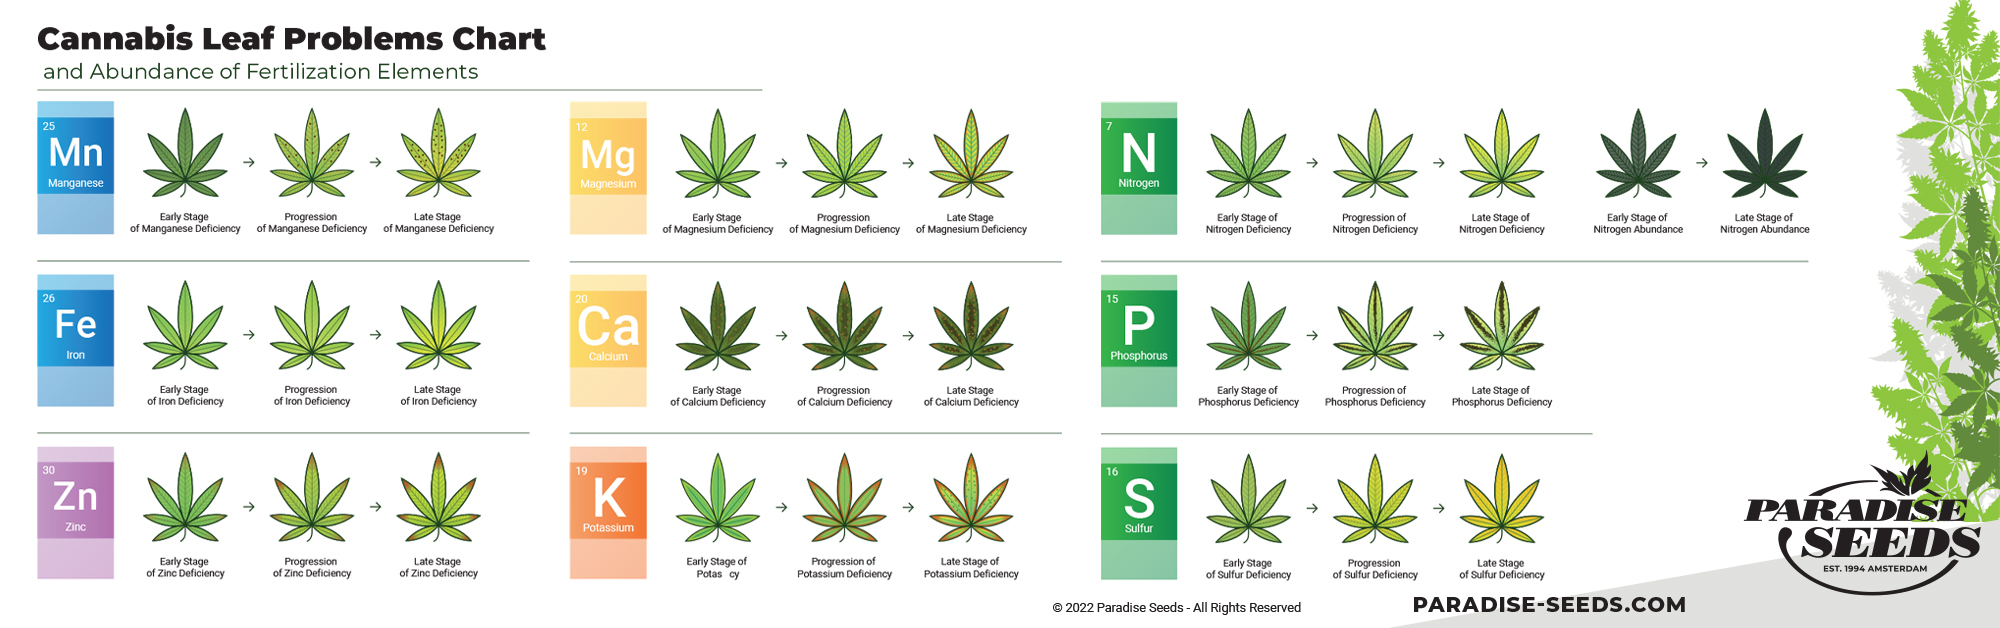 Cannabis nutrient issues chart - deficiency and abbundance 